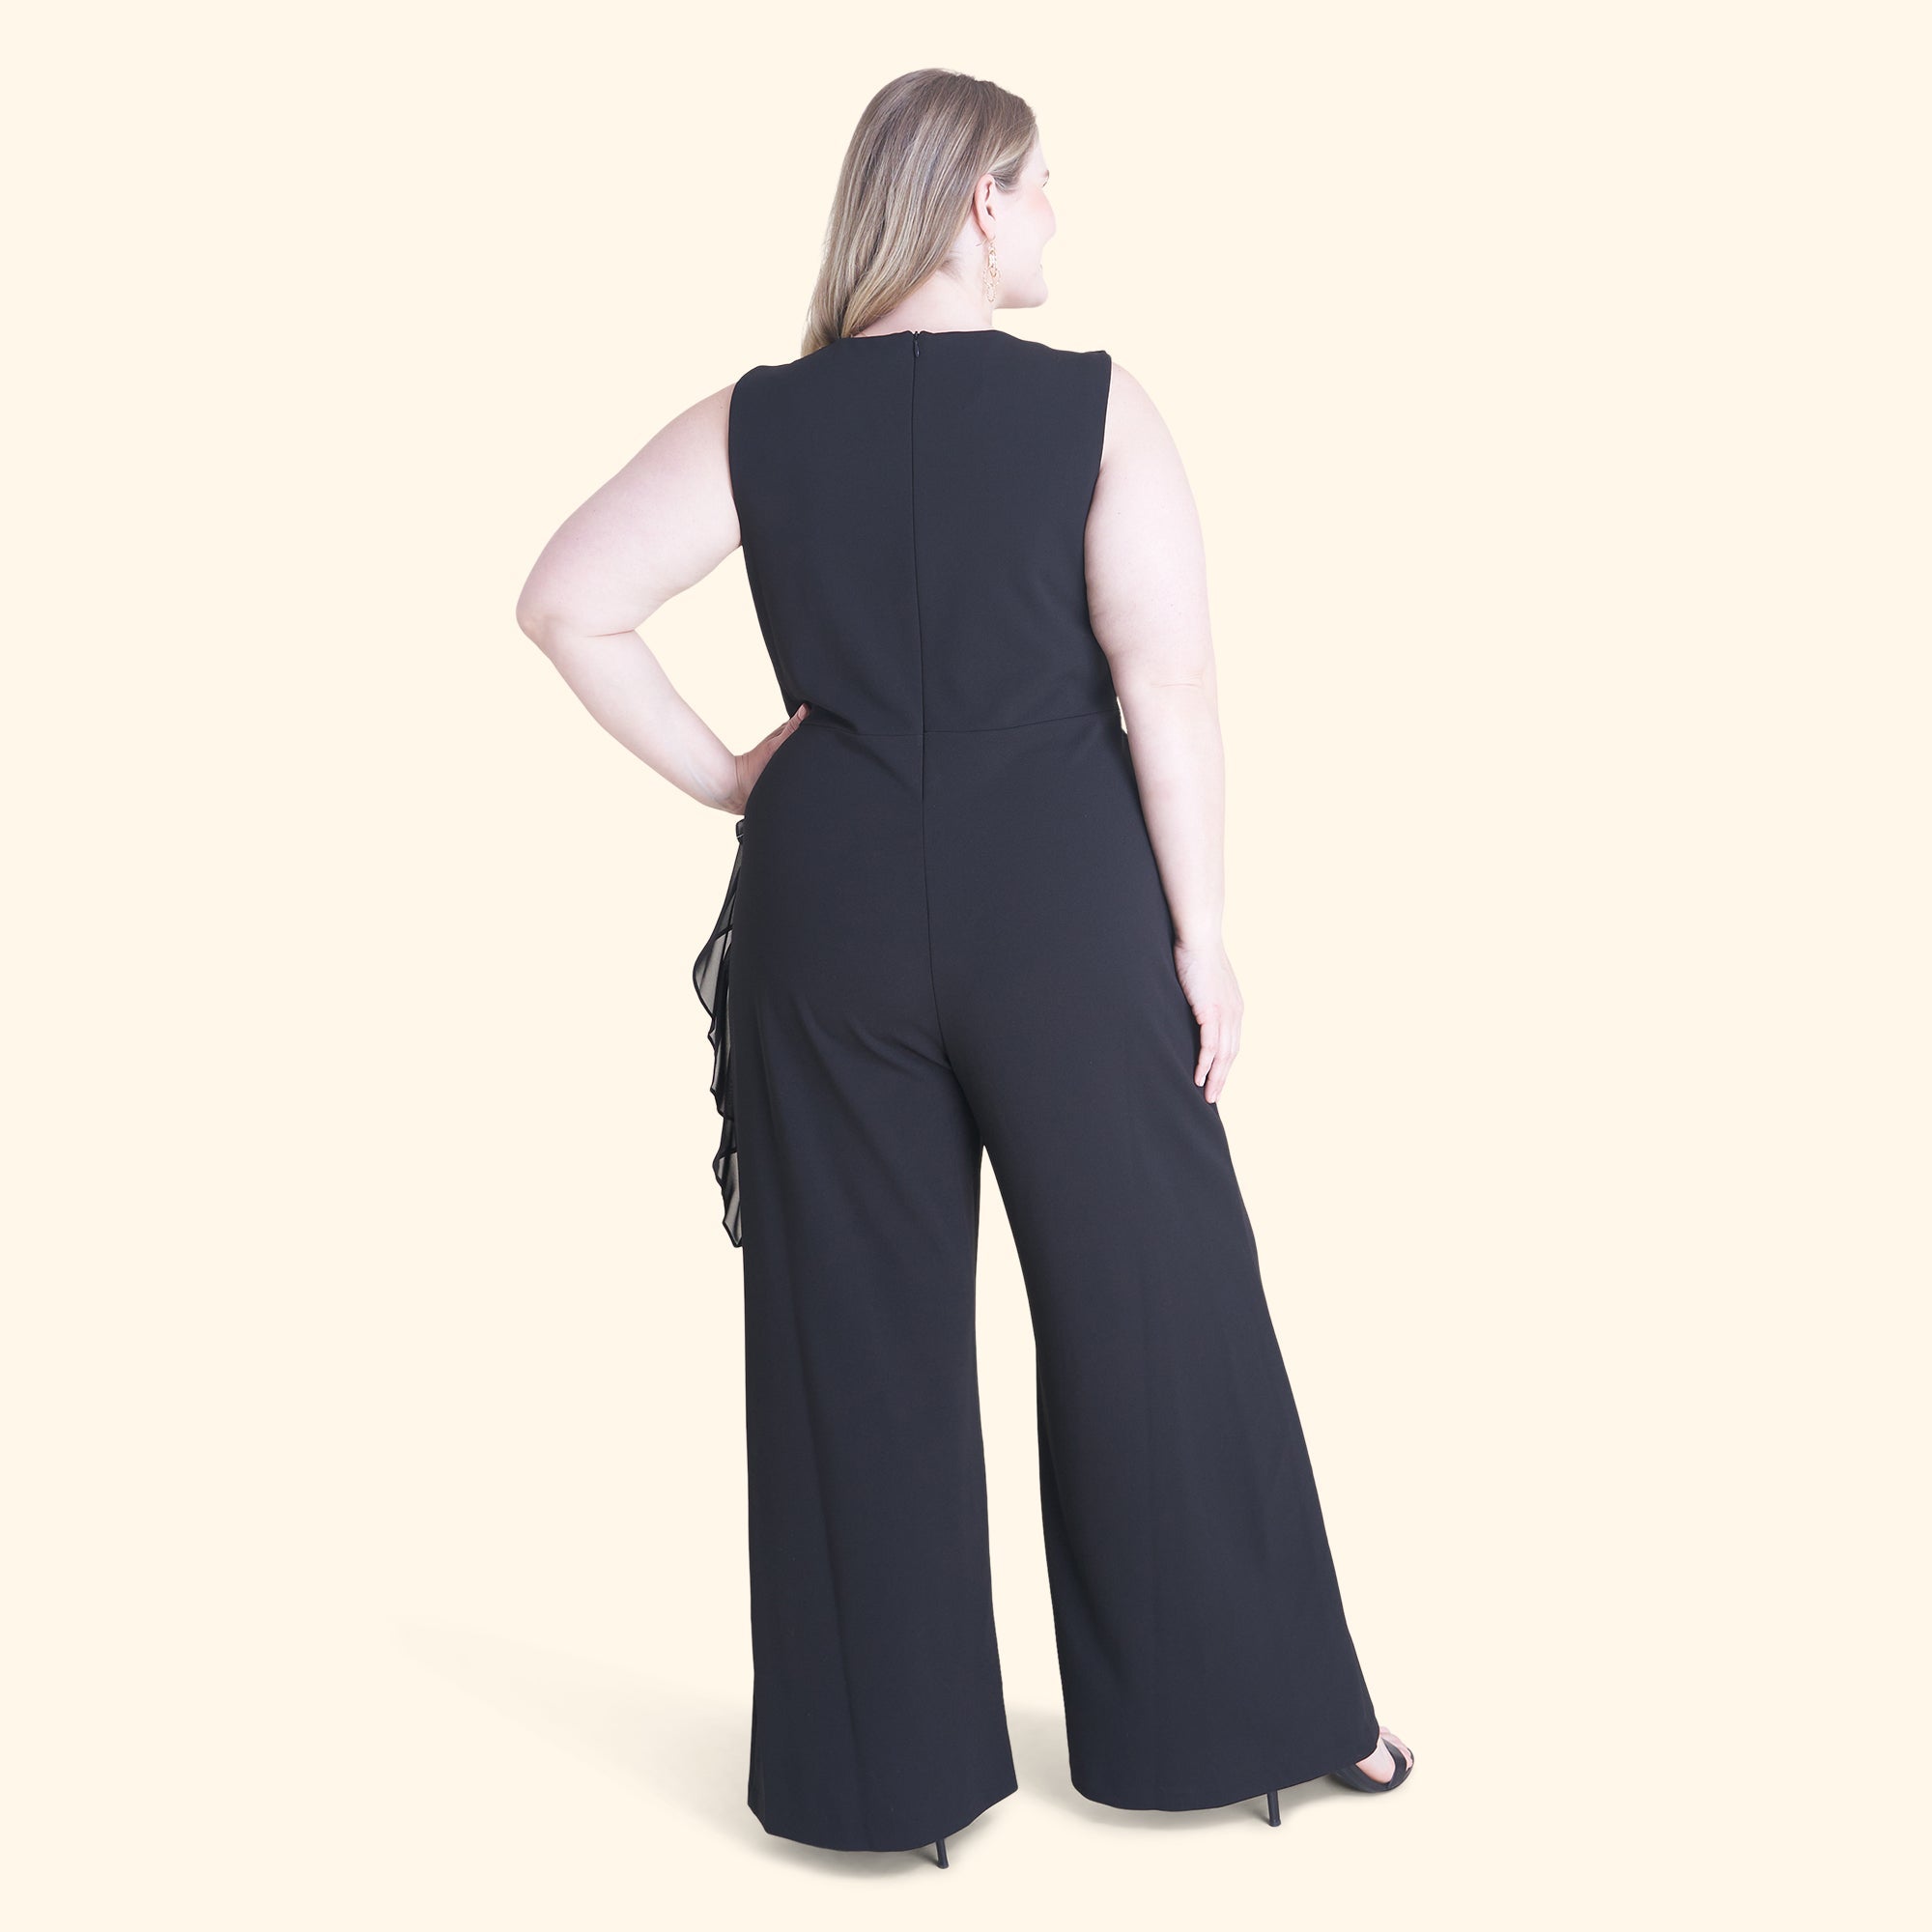 Woman posing wearing Black Sara Black Jumpsuit from Connected Apparel